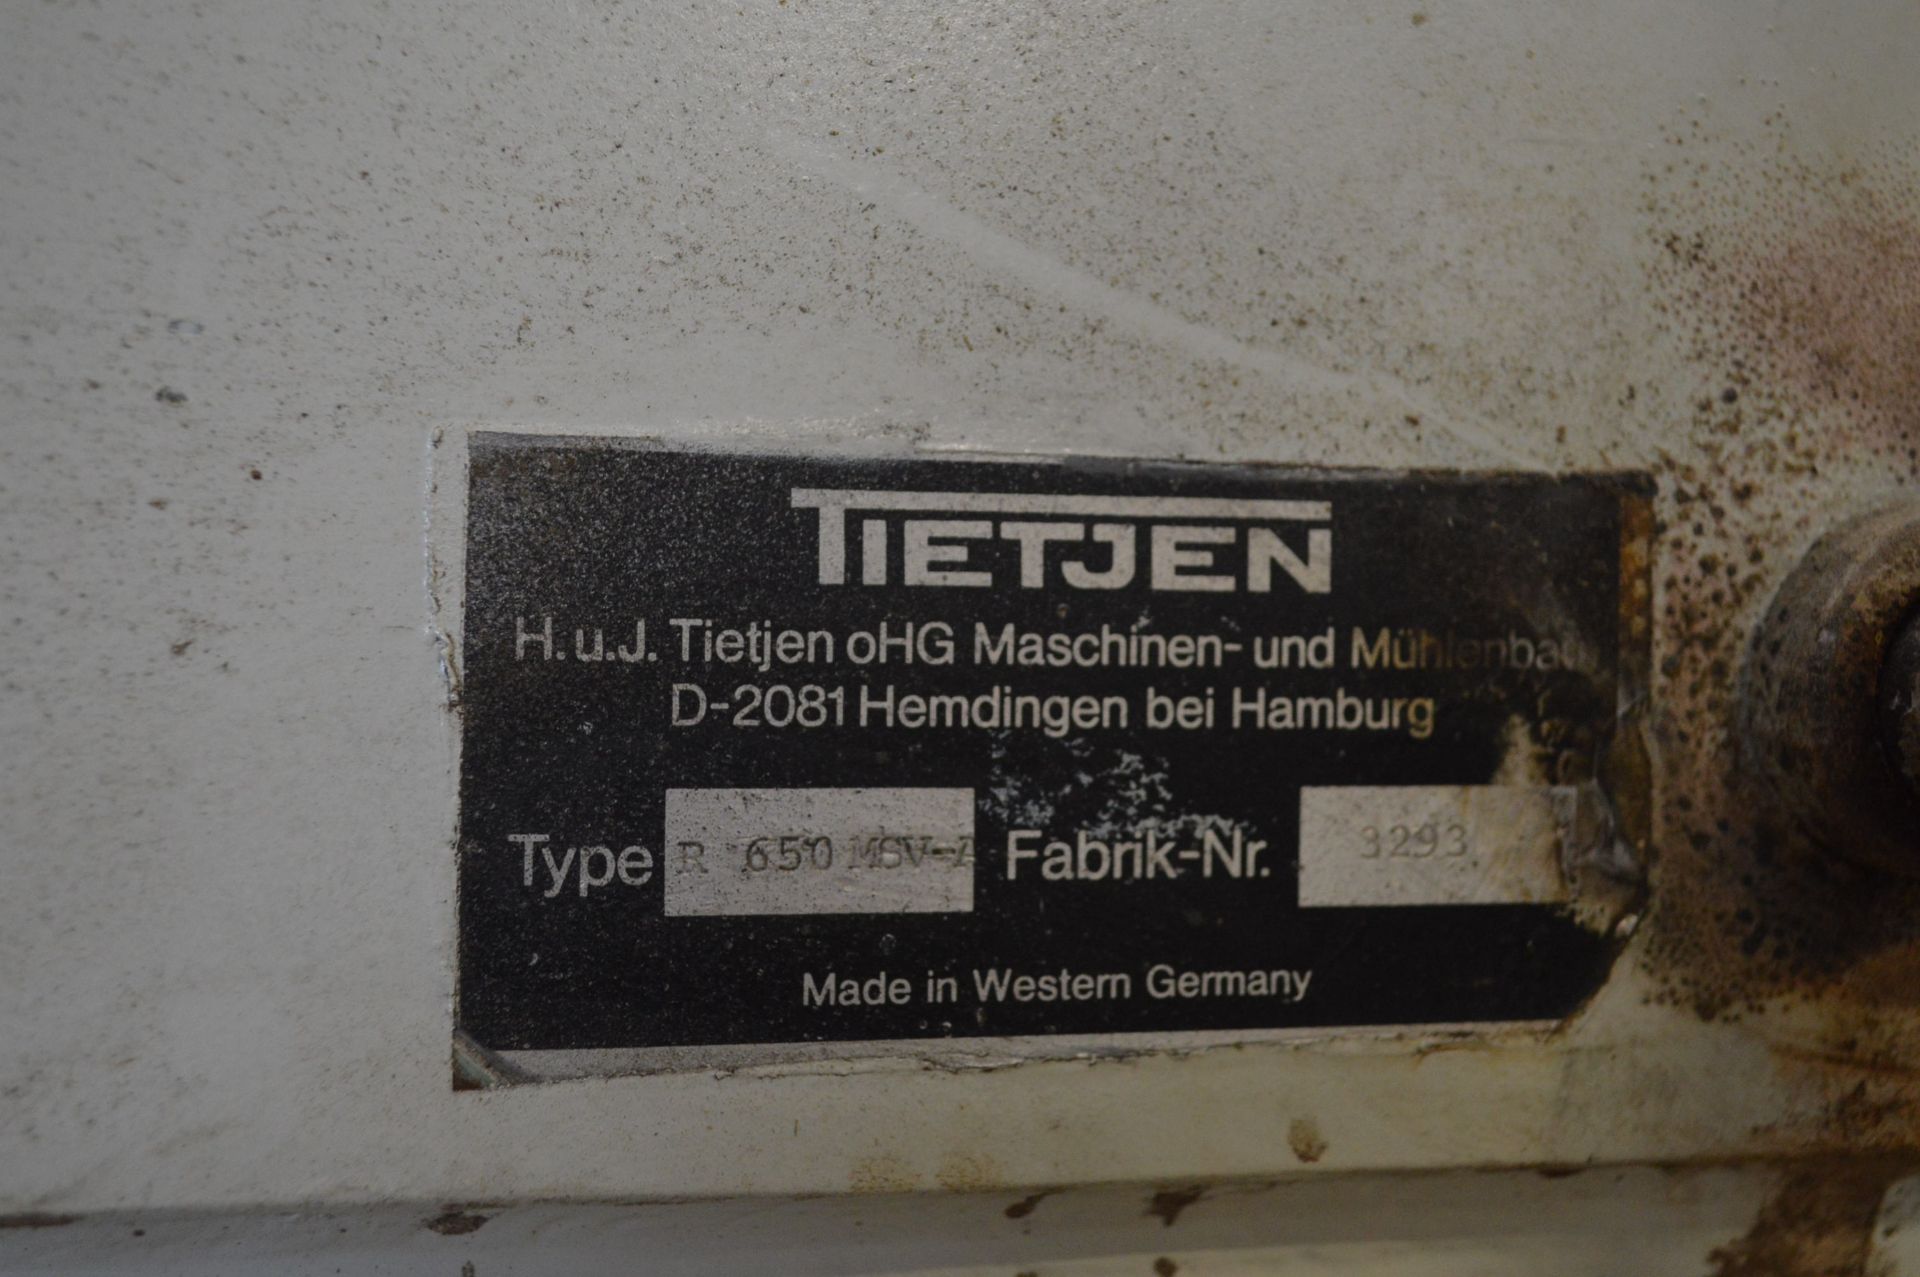 Teitjen HAMMER MILL, with electric motor, R650 MBV-2 feeder, serial no. 3293, fitted permanent - Image 8 of 13